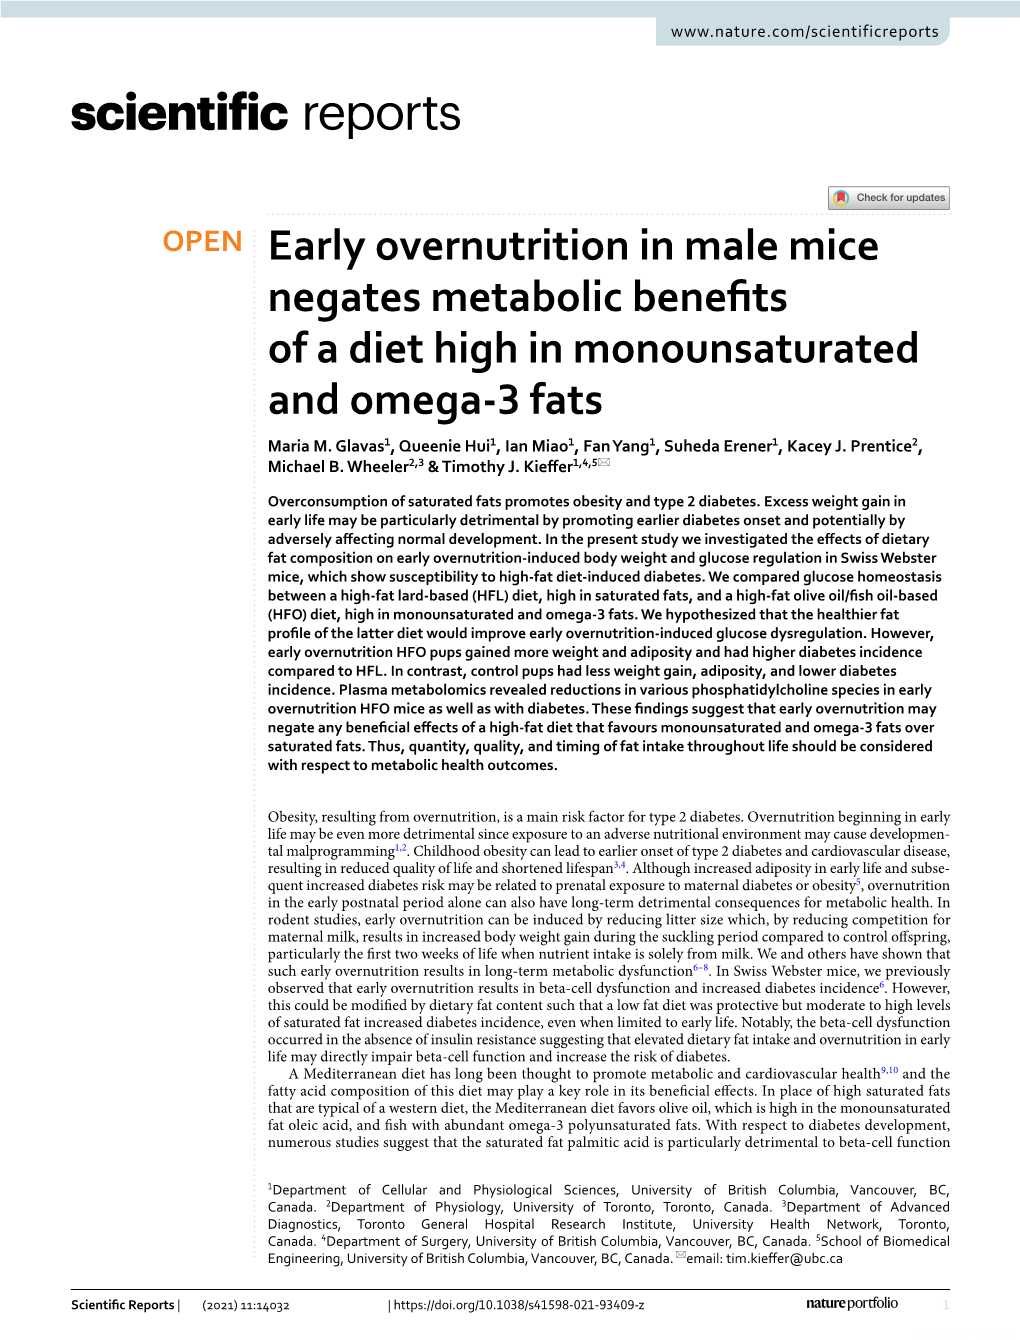 Early Overnutrition in Male Mice Negates Metabolic Benefits of a Diet